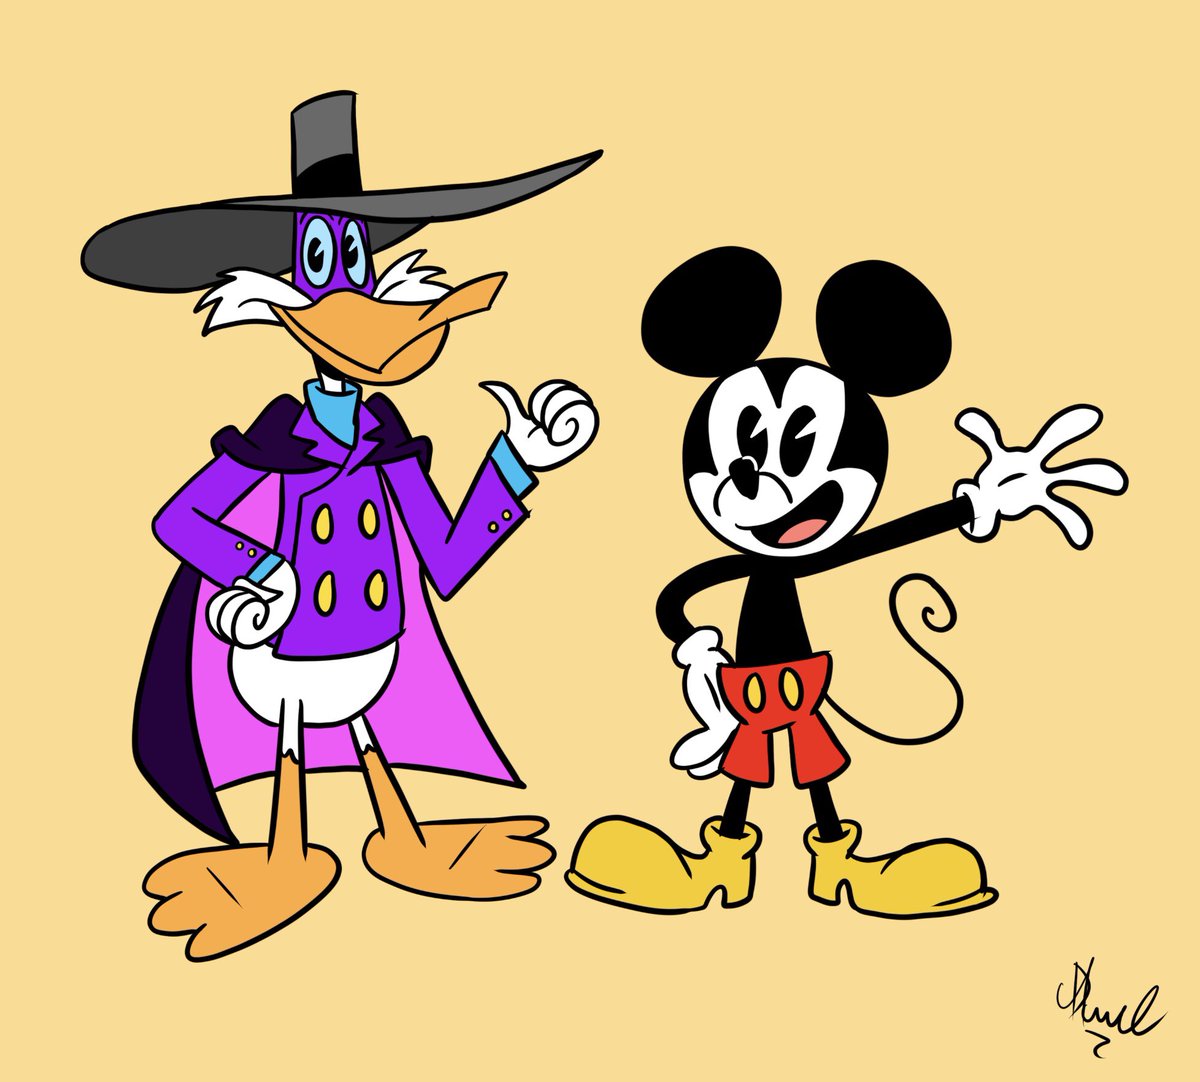 More Darkwing in the Mickey Mouse shorts style

#darkwingduck #thewonderfulworldofmickeymouse